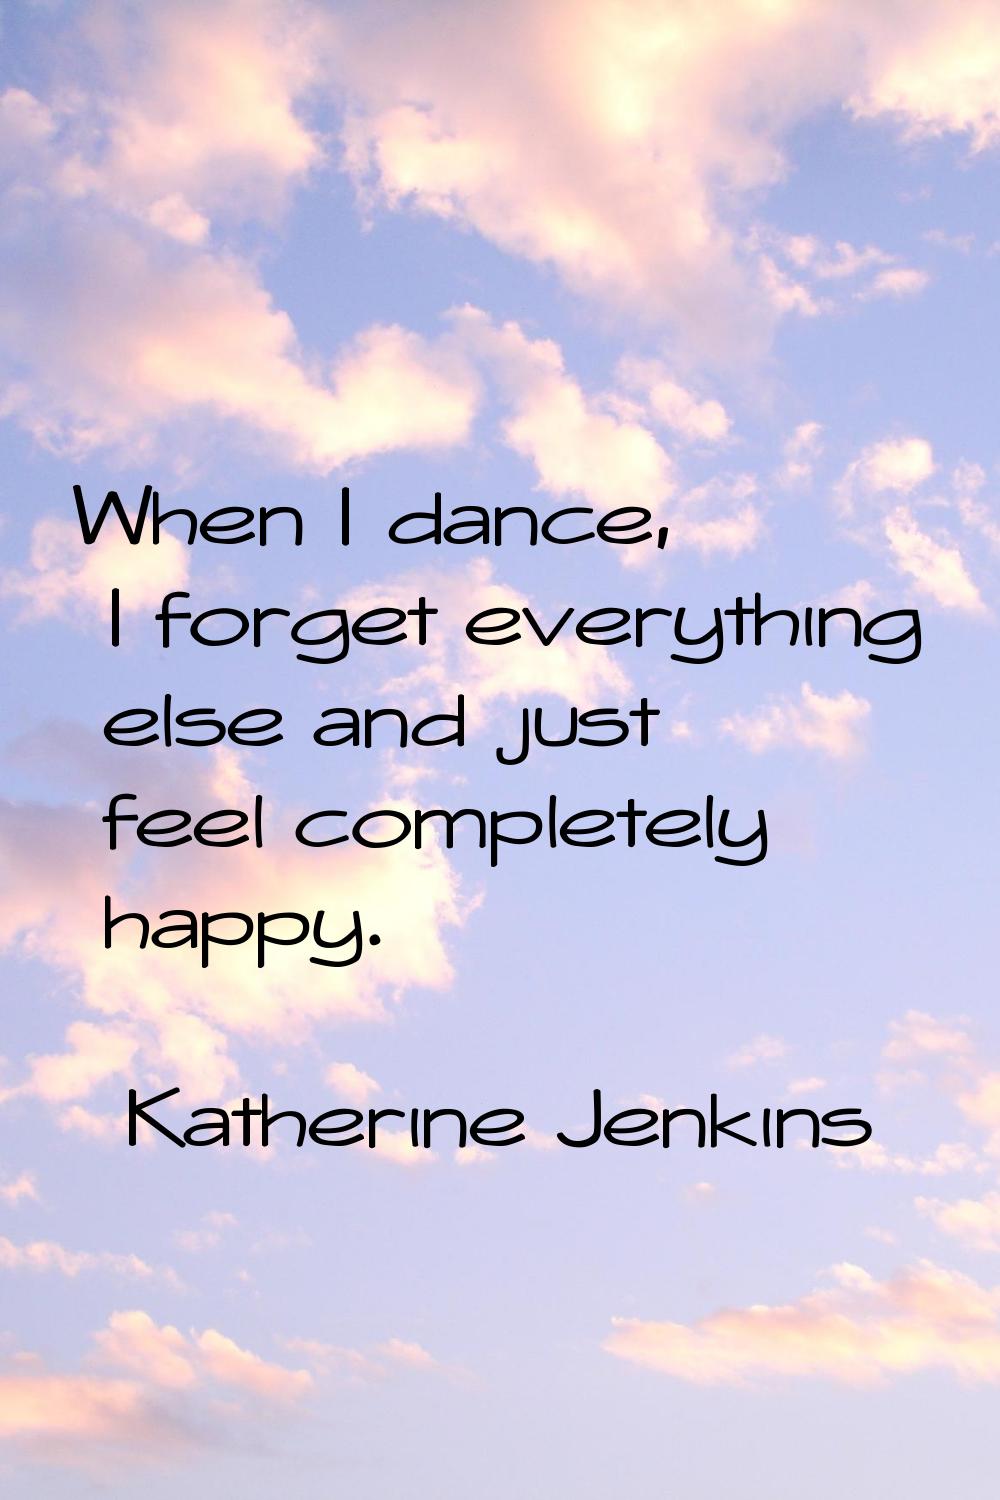 When I dance, I forget everything else and just feel completely happy.